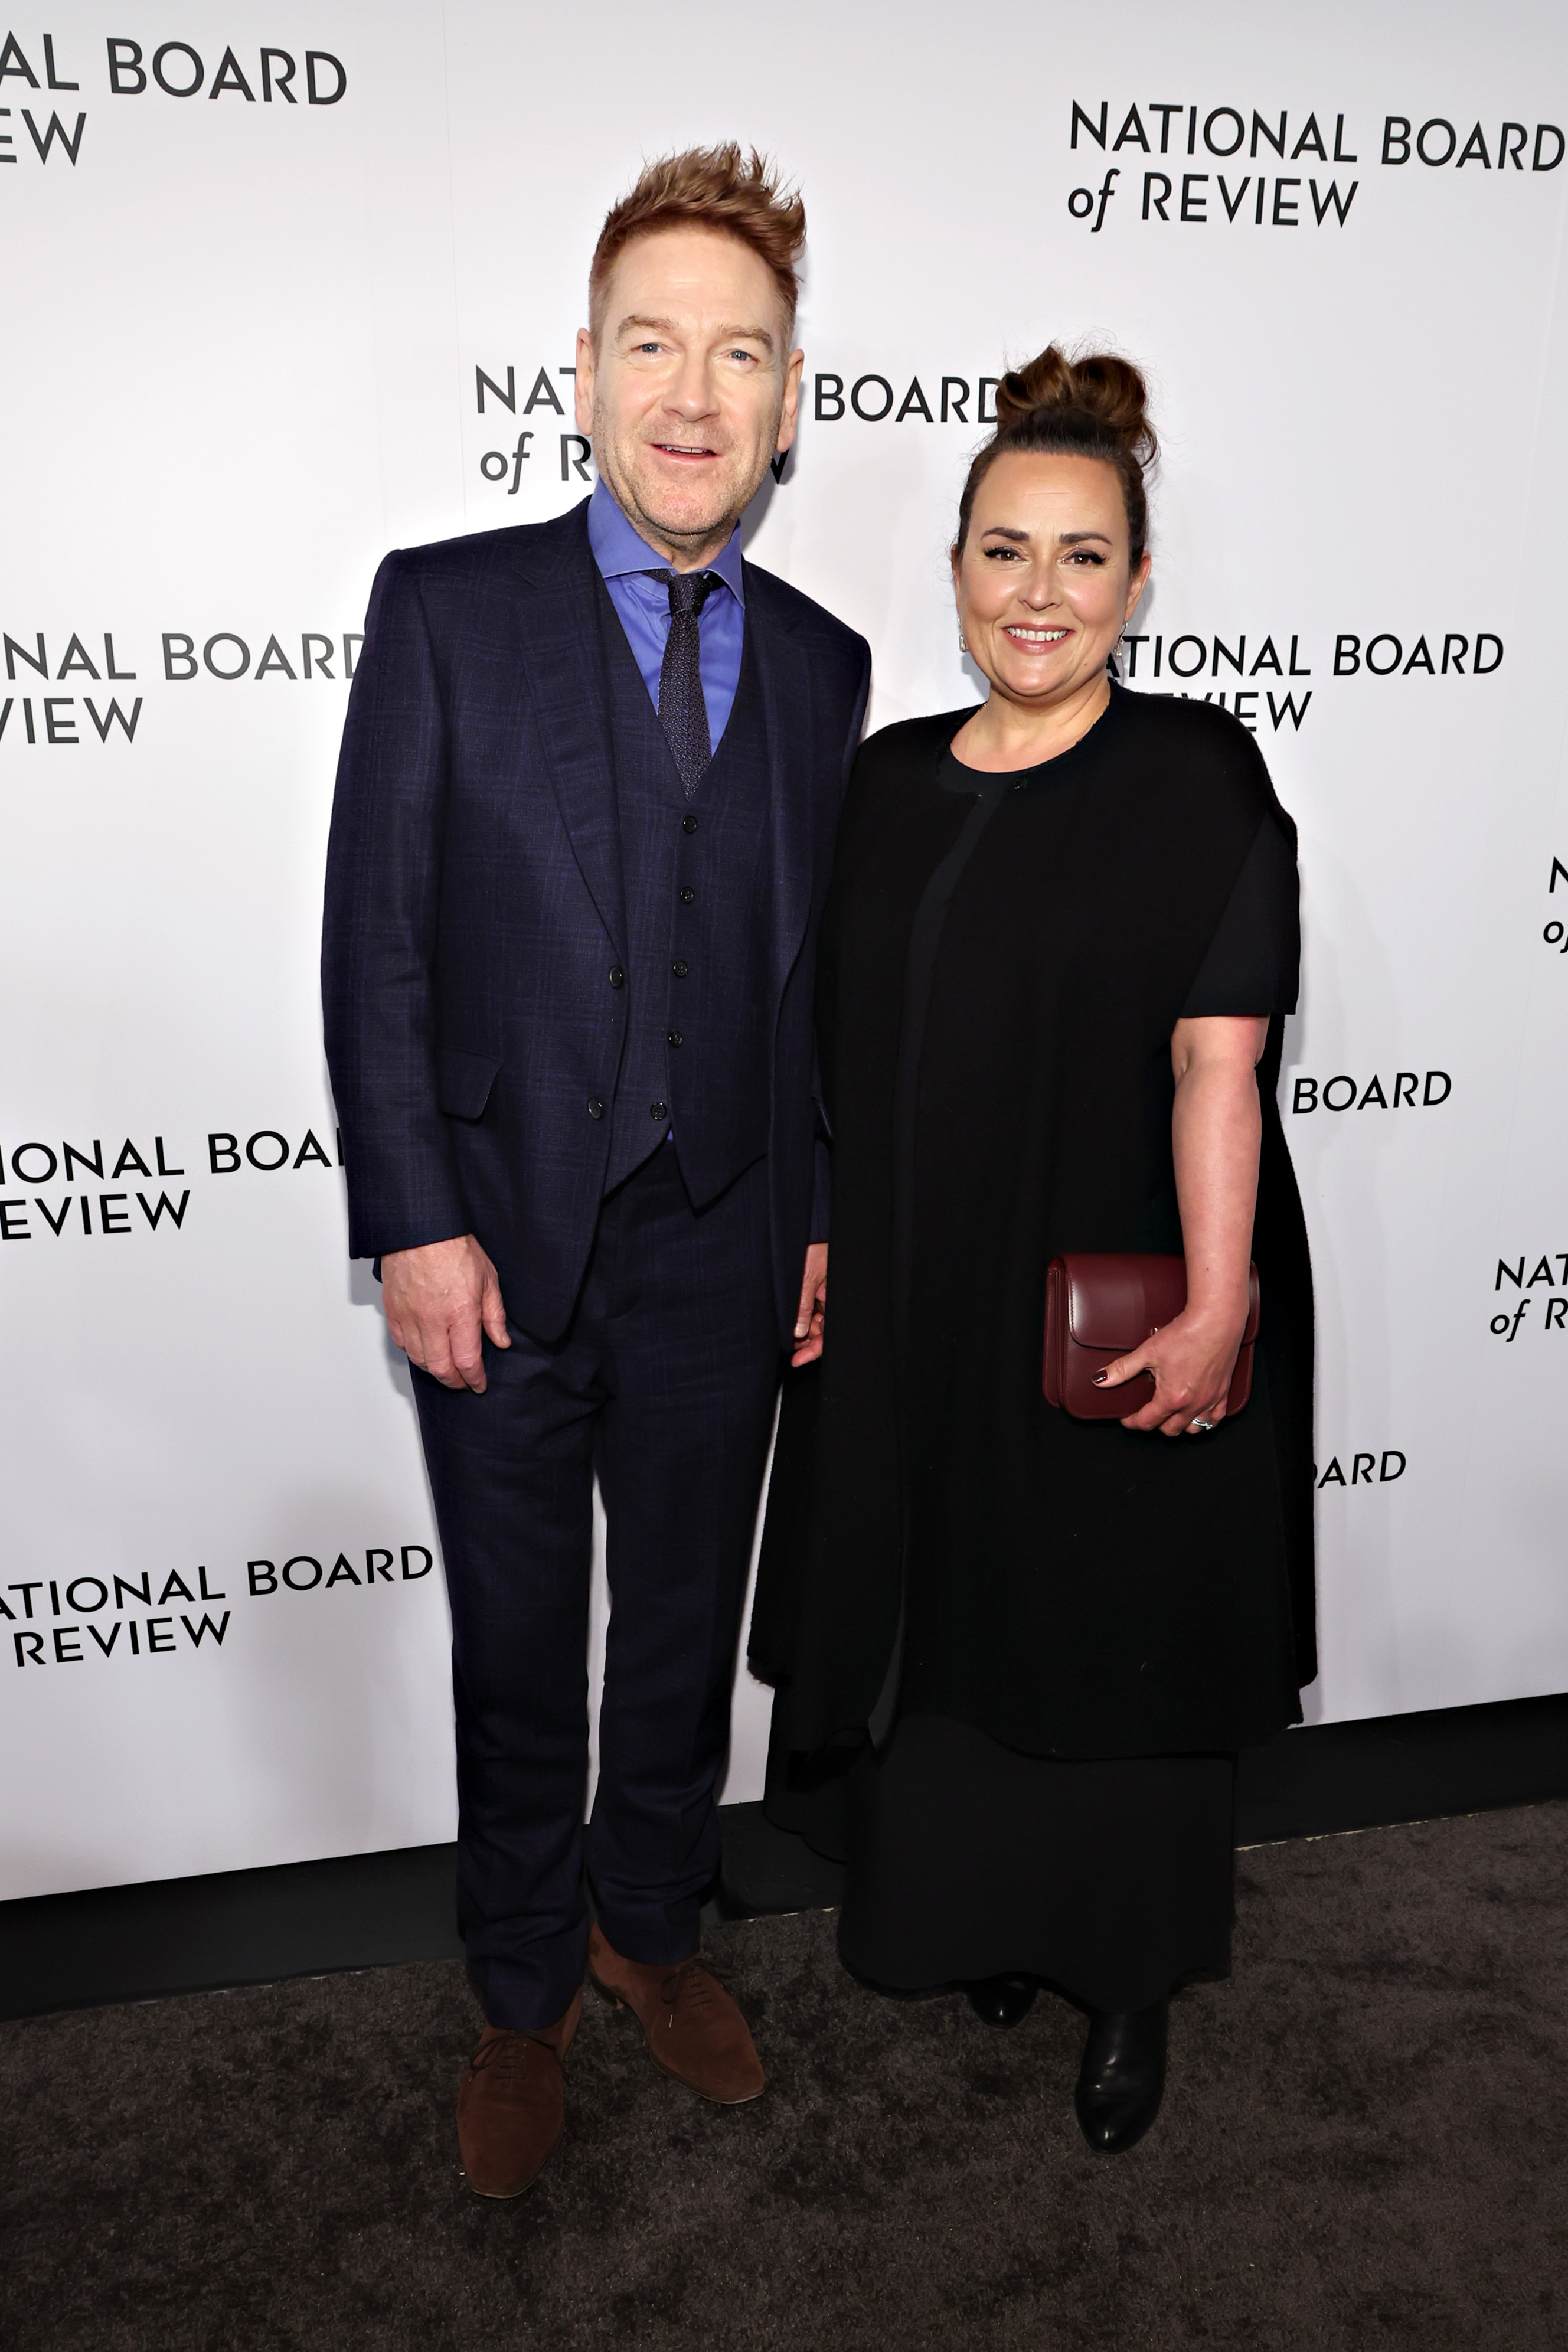 Kenneth Branagh and Lindsay Brunnock pose at the National Board of Review annual awards gala at Cipriani 42nd Street on March 15, 2022, in New York City | Source: Getty Images